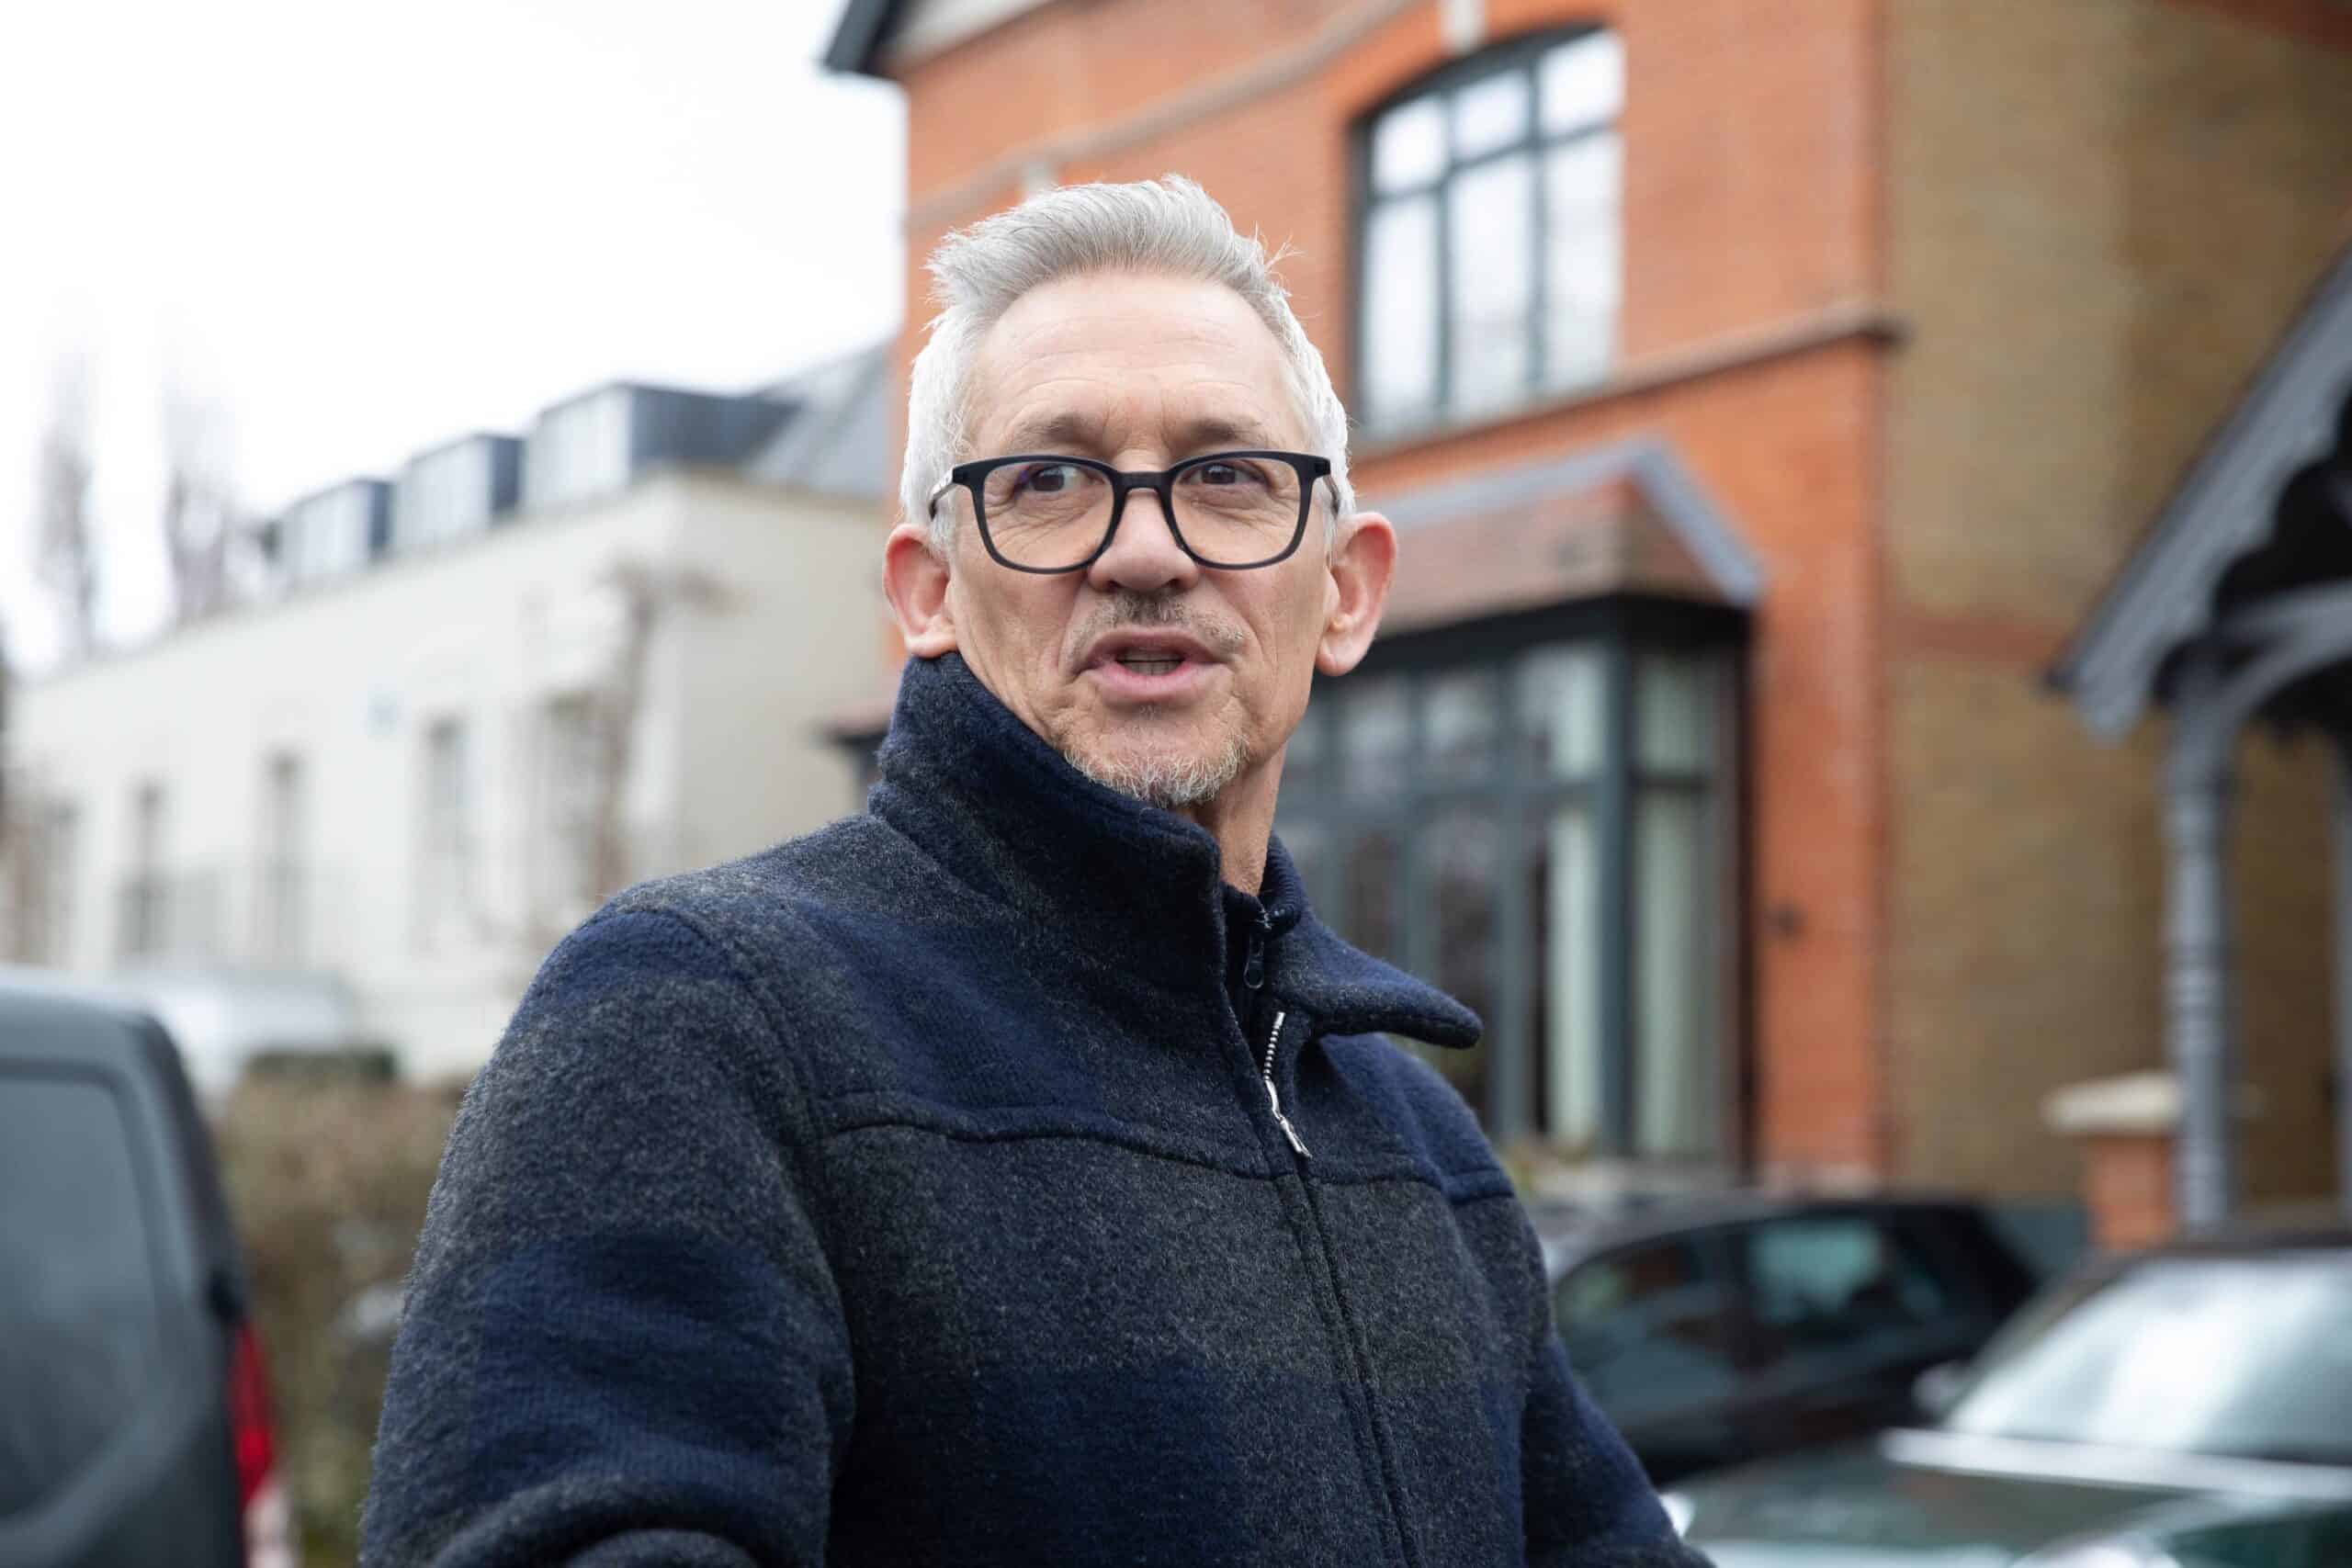 Gary Lineker says he was given a ‘standing ovation’ in his local supermarket following BBC ban